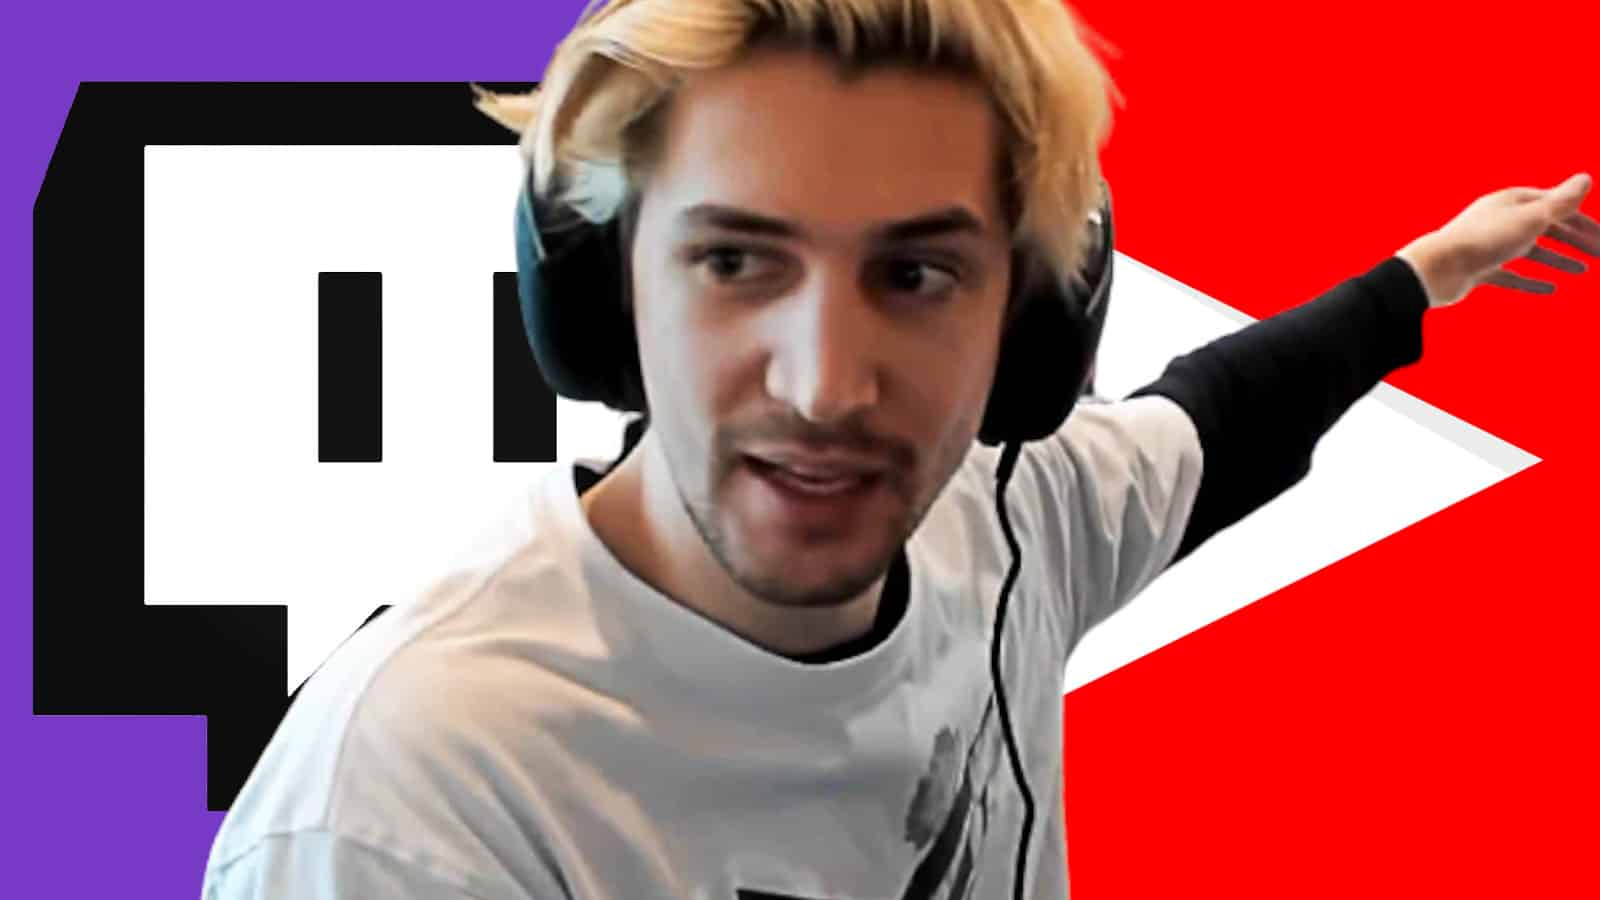 xQc on Twitch streamers going to YouTube